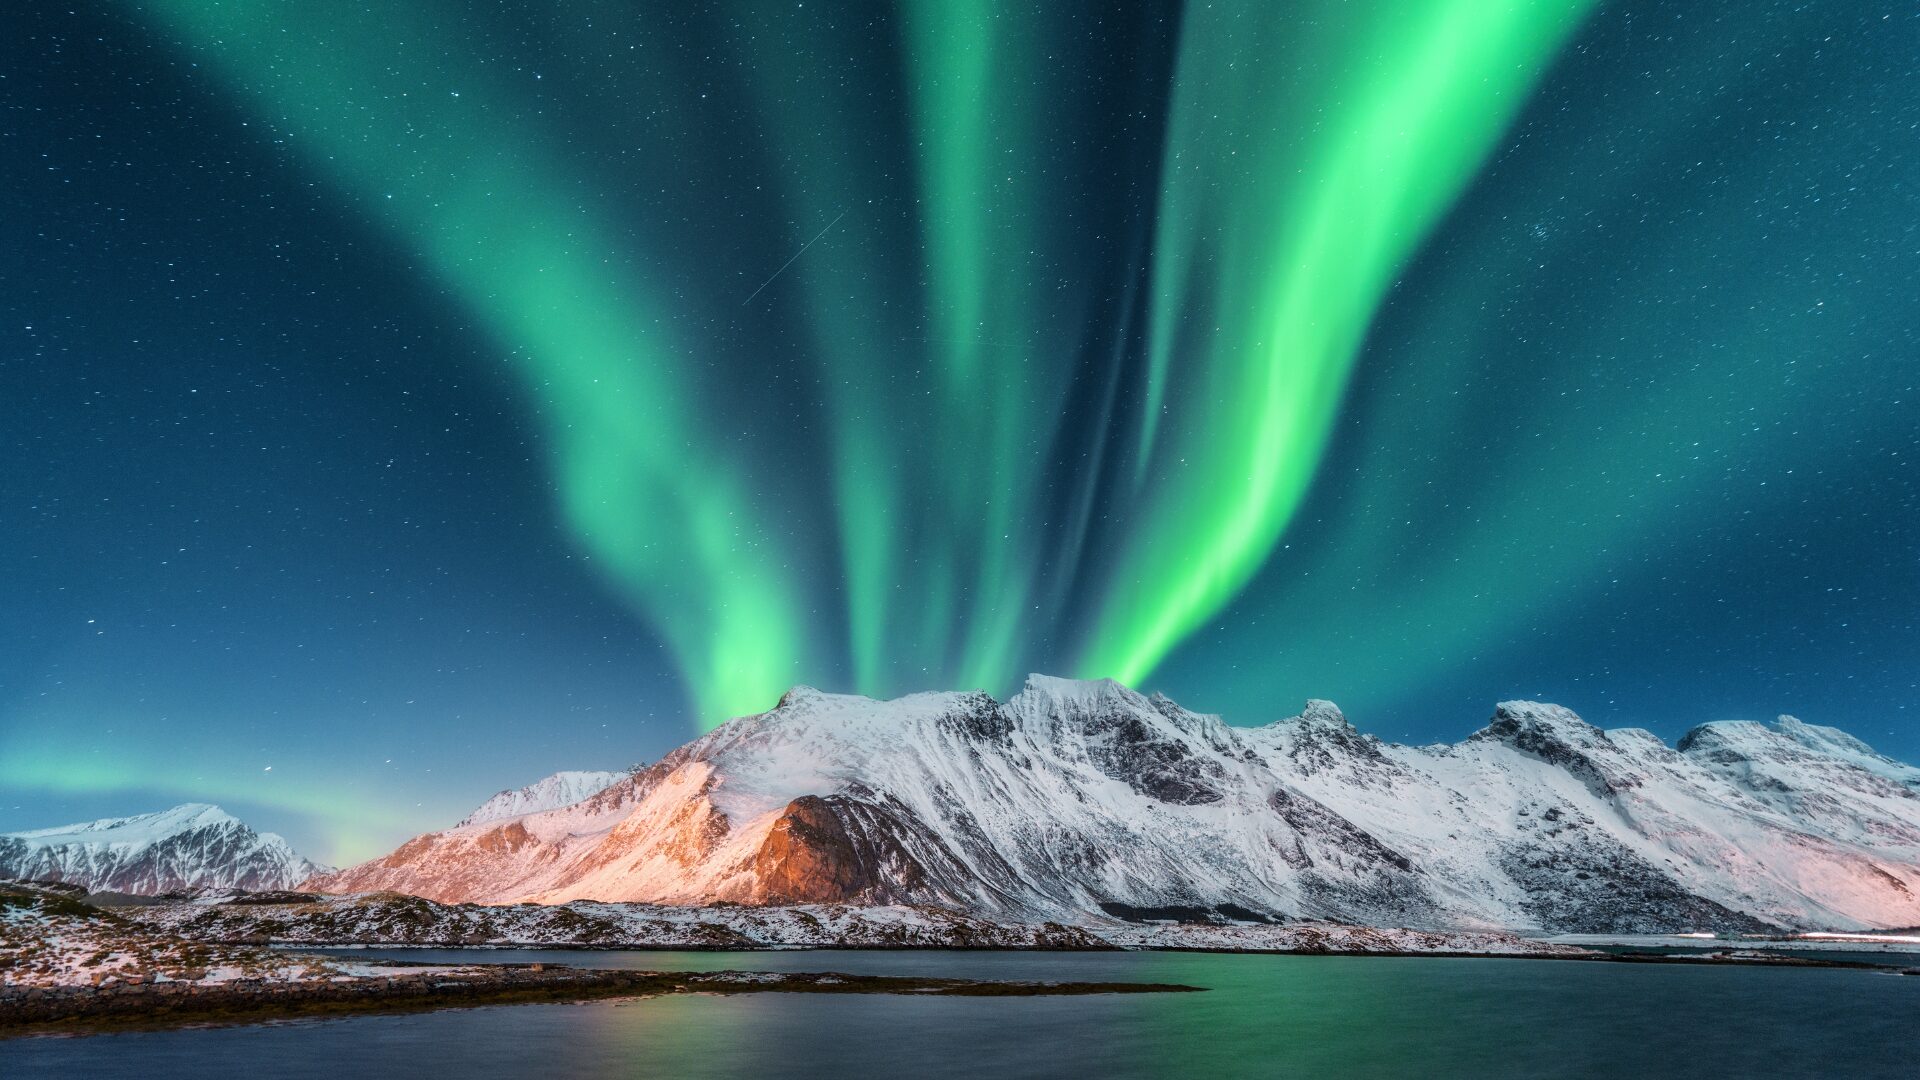 An aerial shot of the Northern Lights in Lofoten Islands, Norway.